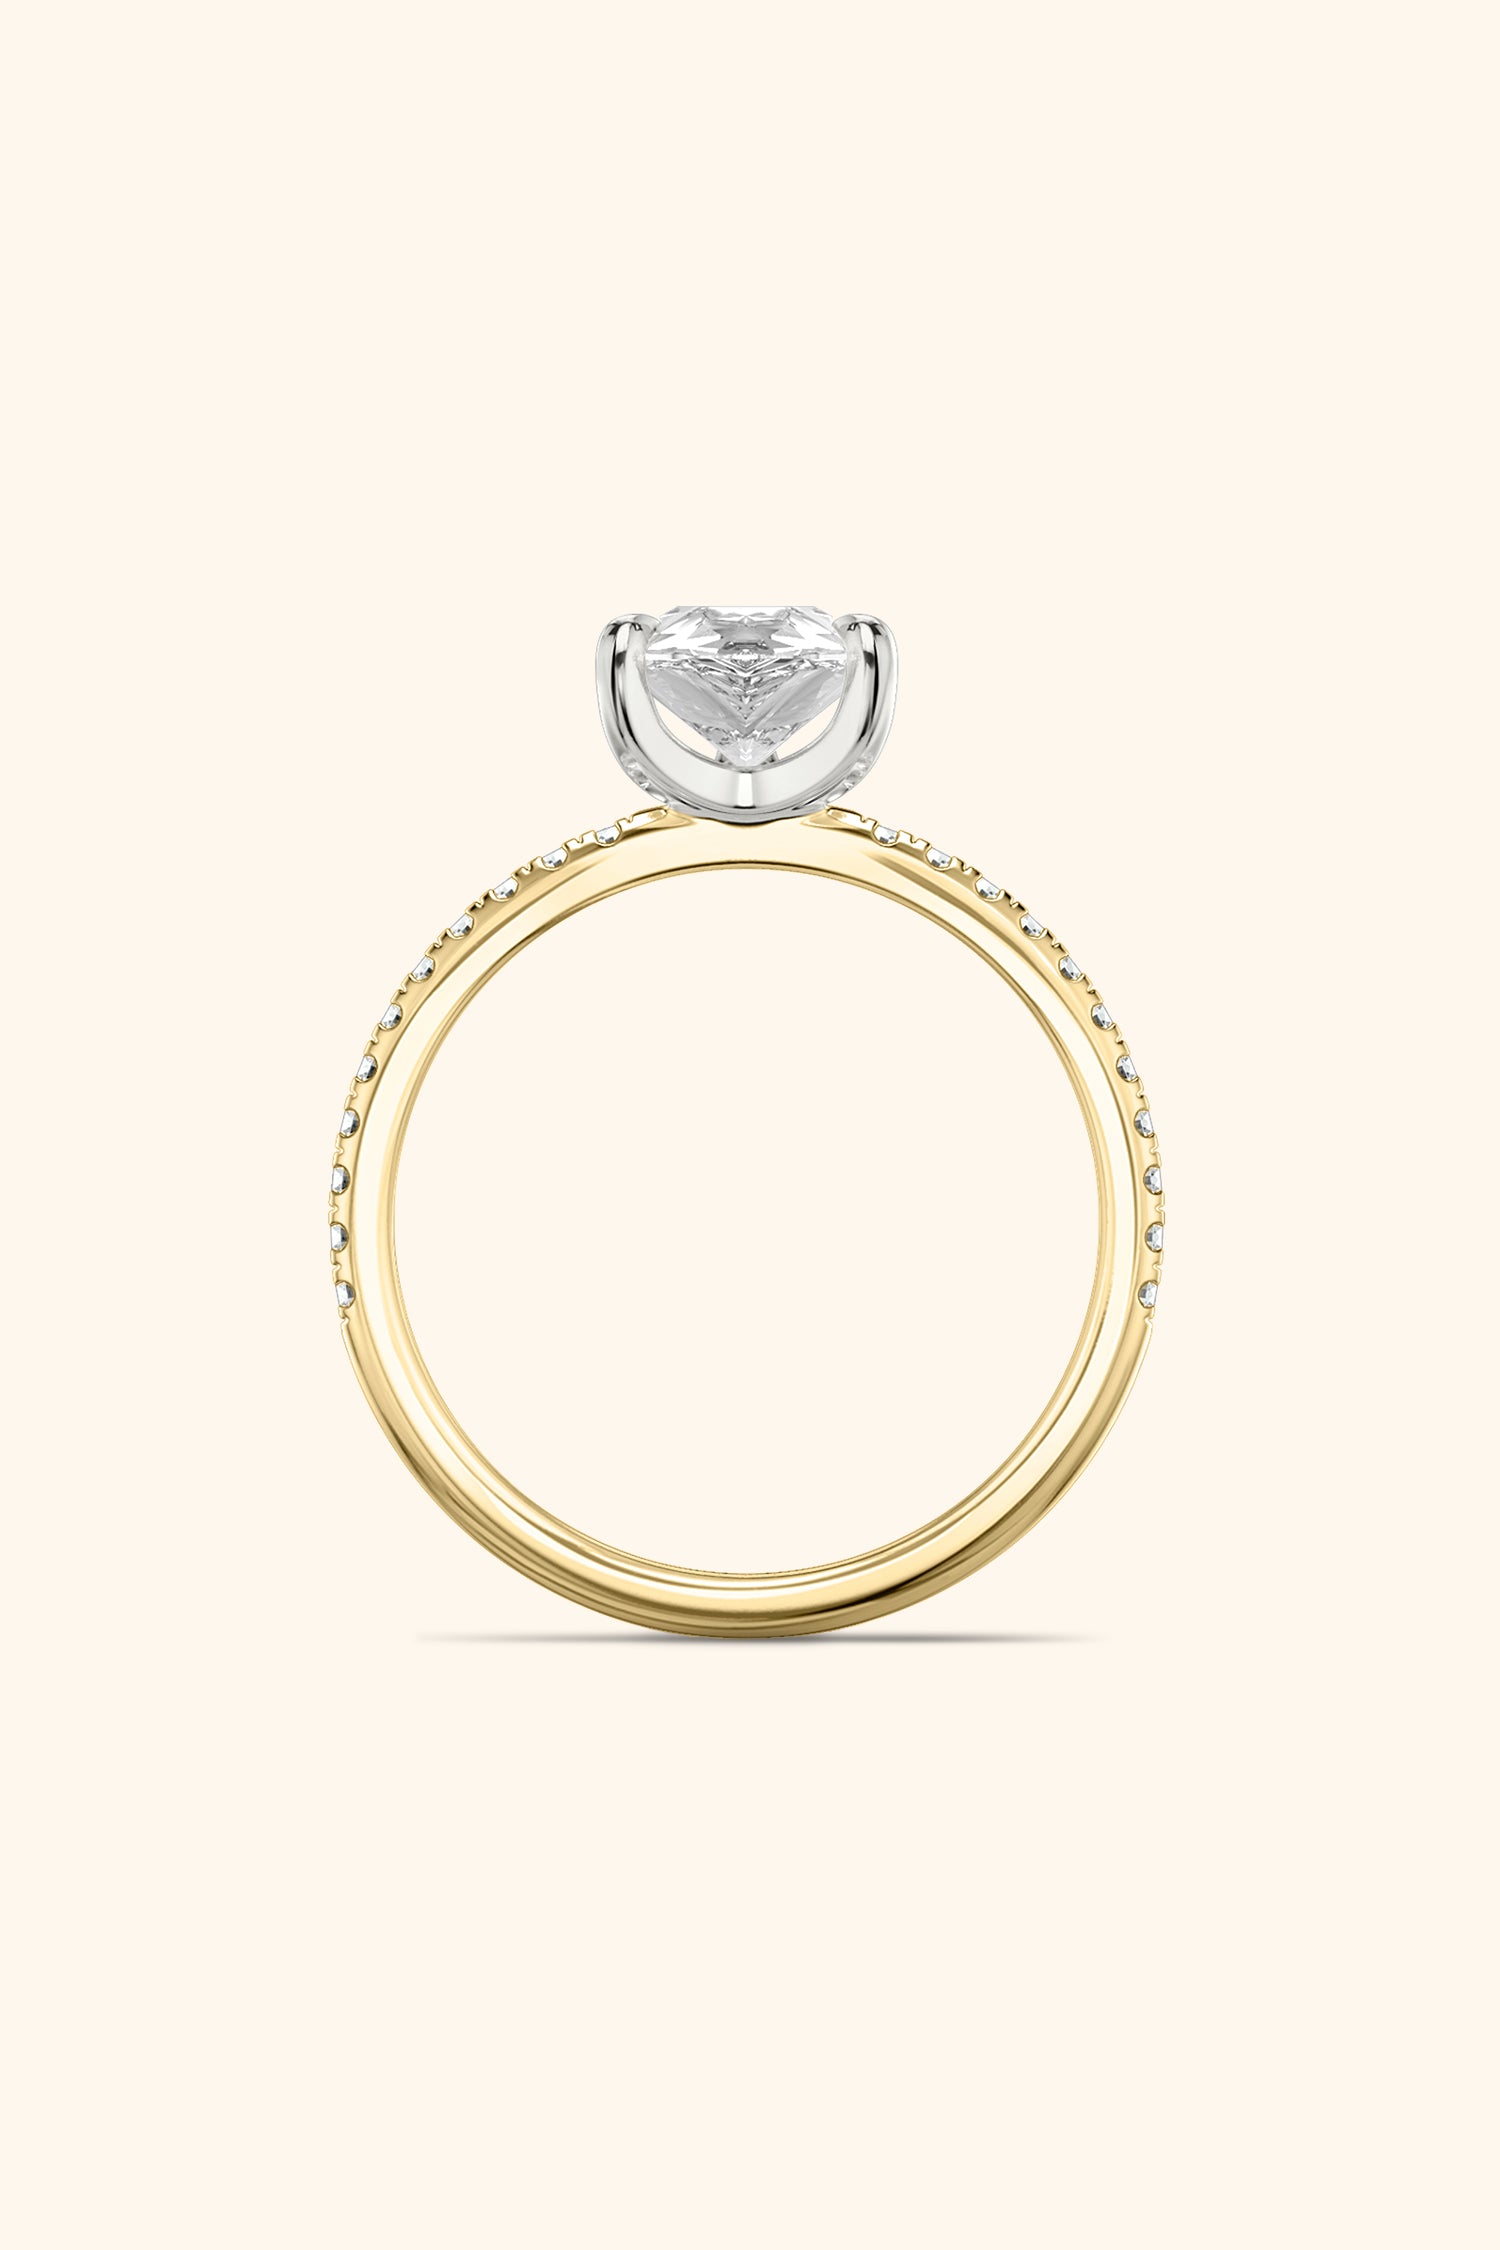 Dual Tone Glance Pavé Ring with 2 Carat Pear Solitaire